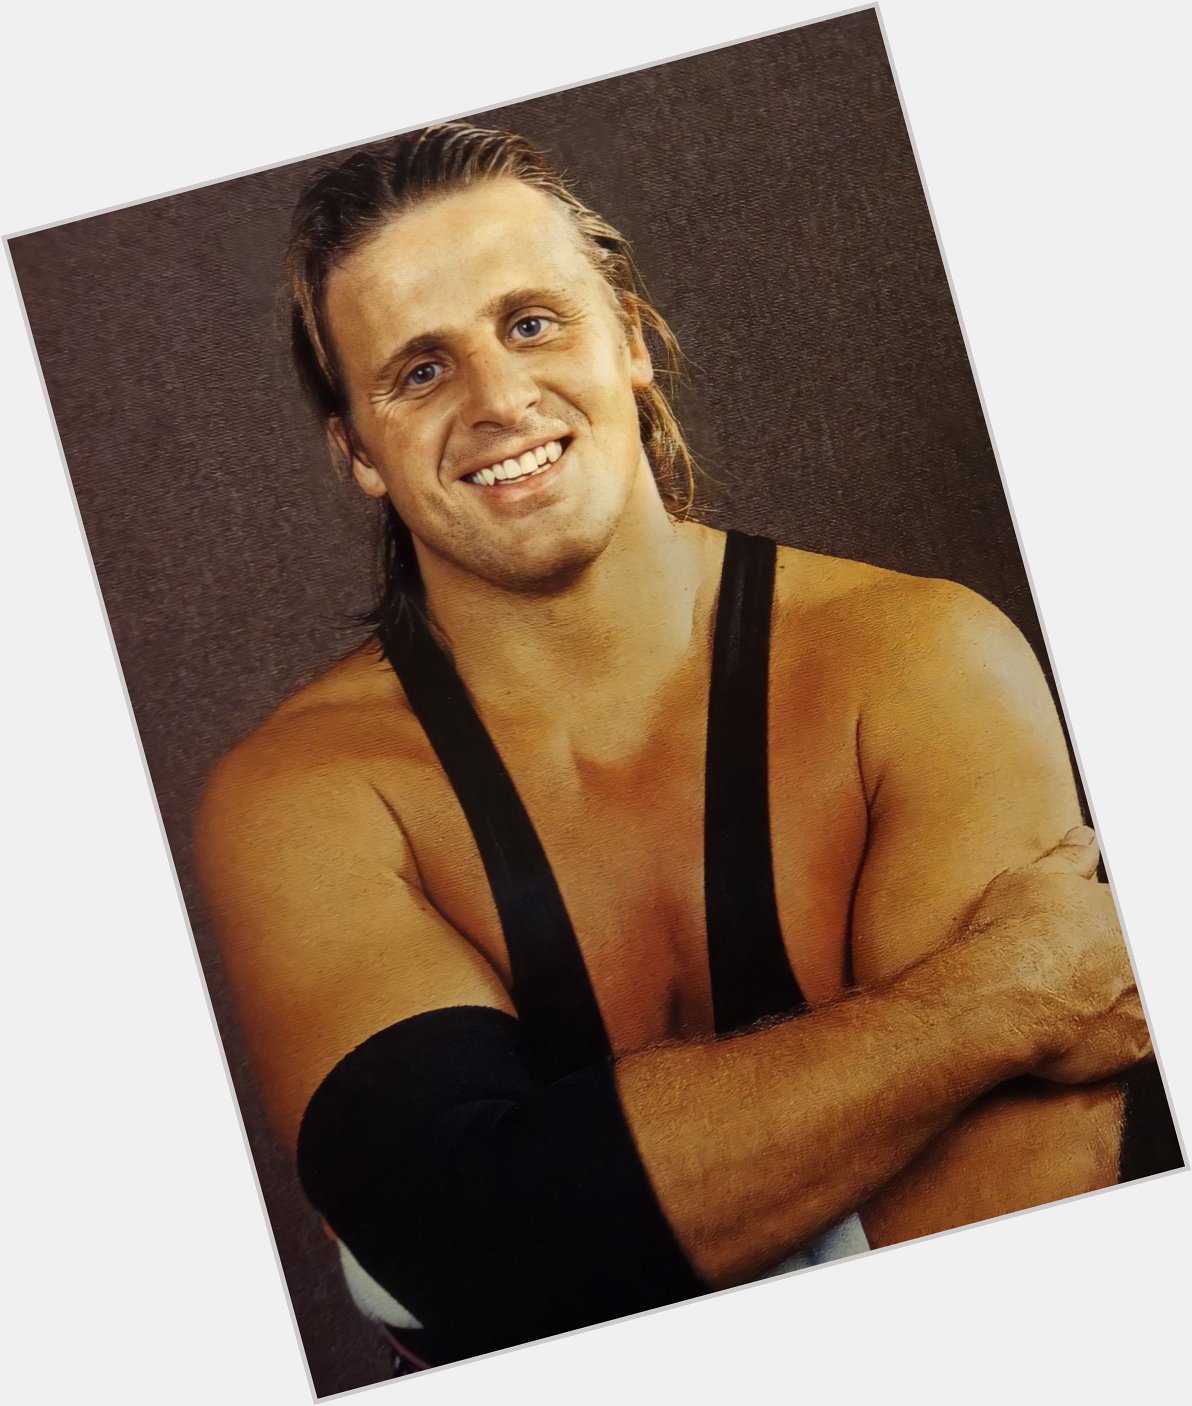 Happy heavenly birthday to Owen Hart! He would have turned 56 today. 